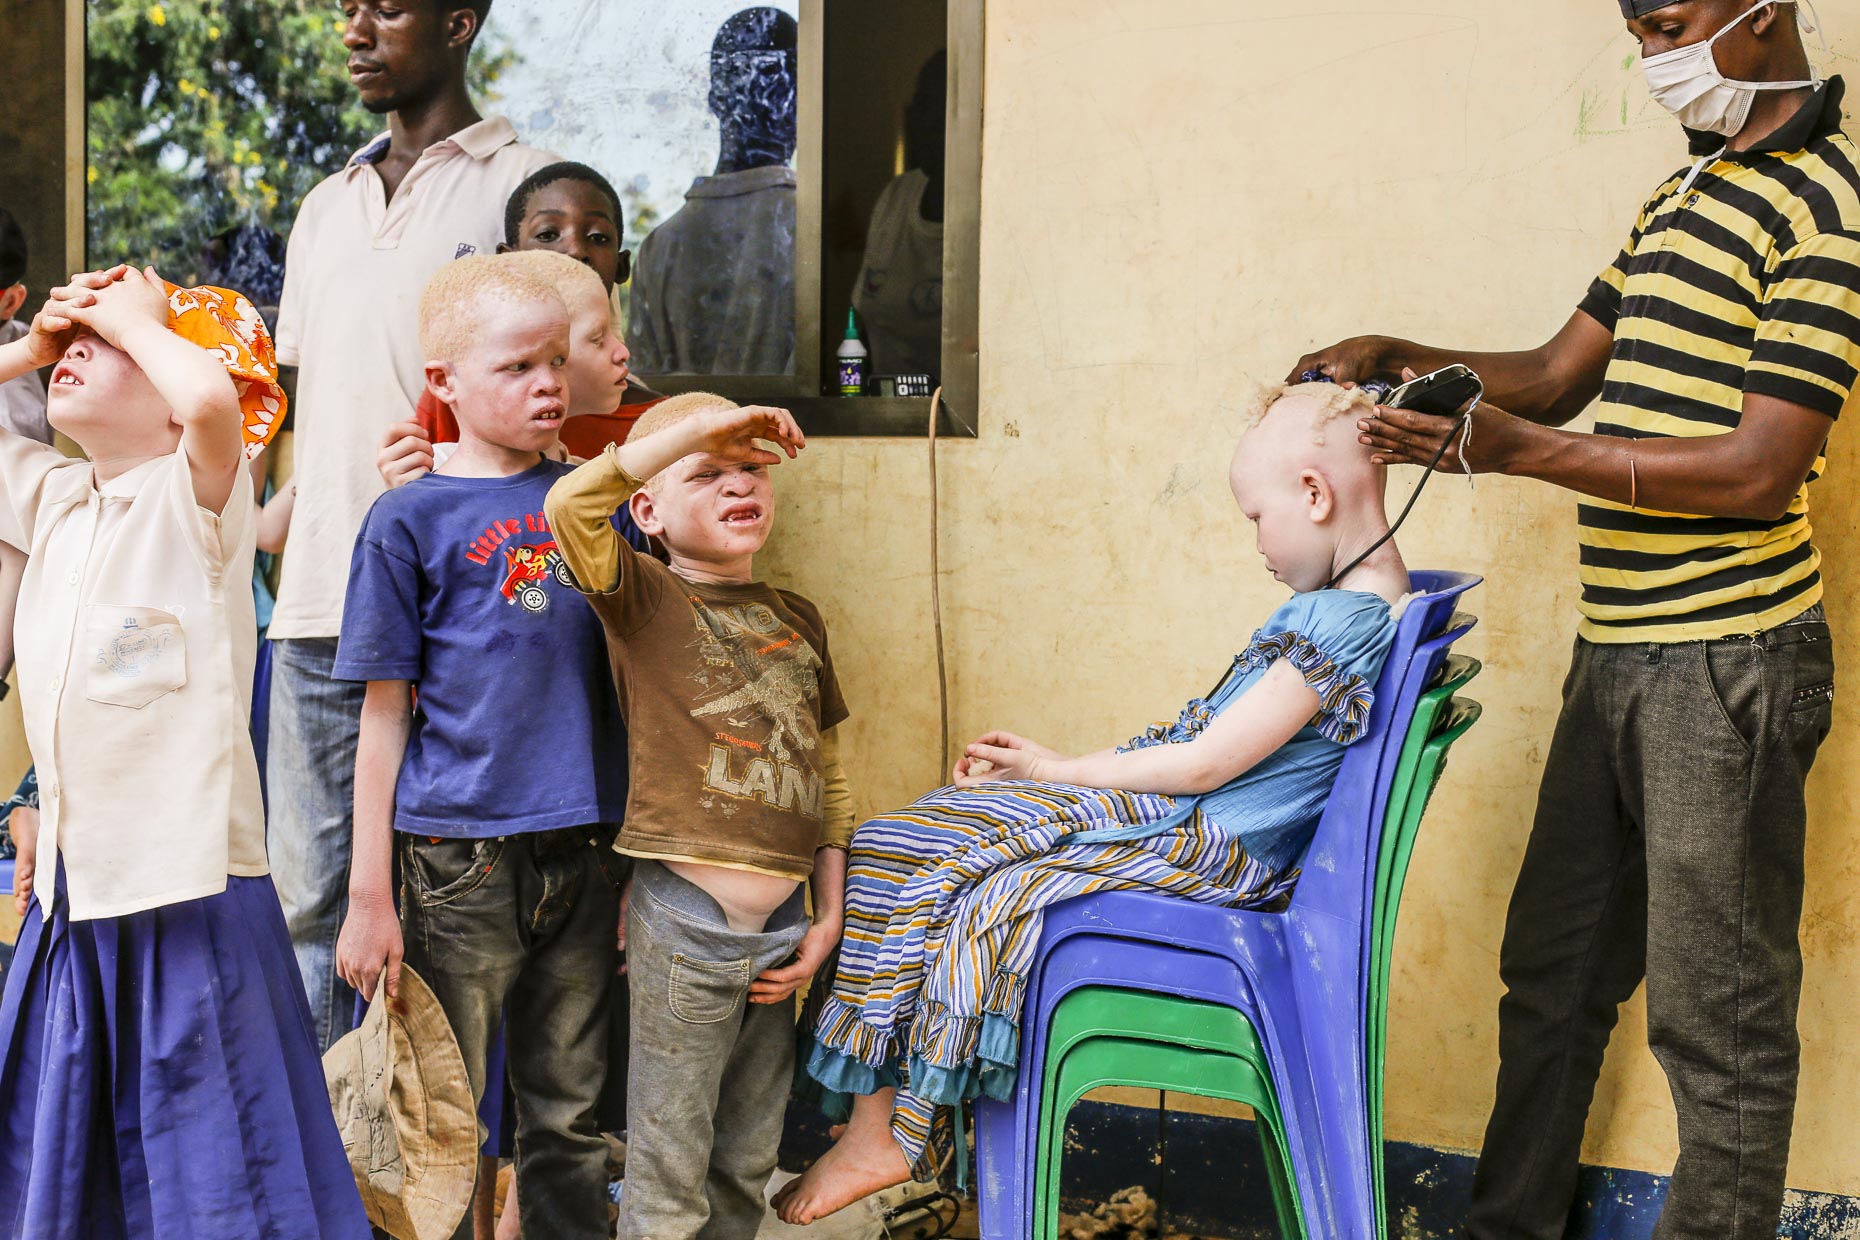 A group of children line up to have their heads shaved in an orphange for albinos in East Africa